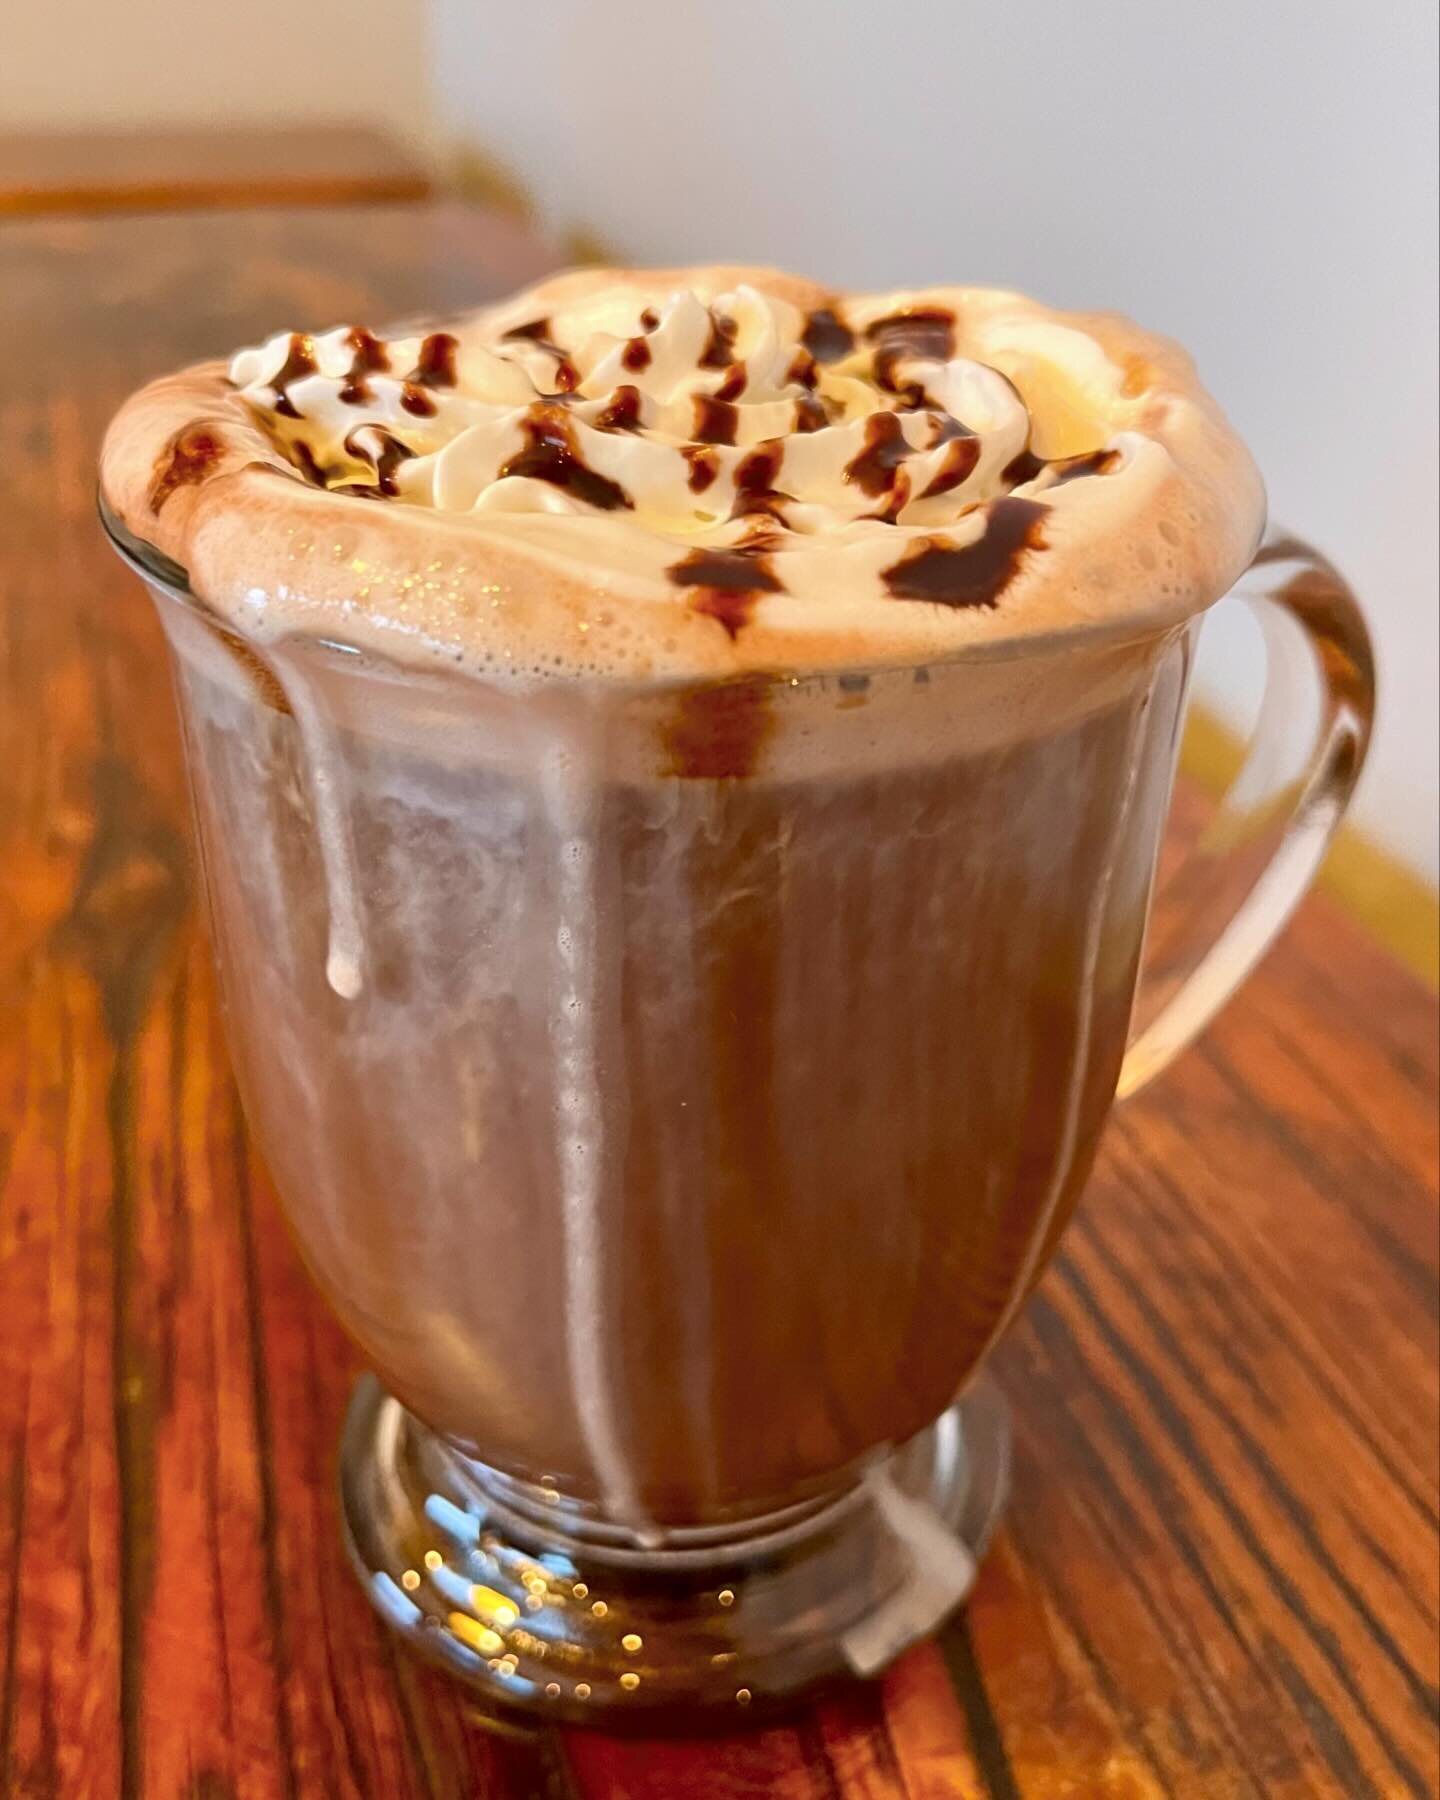 Come warm up with us! The Funky Franklin is sure to do the trick❄️☕️

Narrow Road Vodka &bull; Franklin Coffee Liqueur &bull; Hot Cocoa &bull; 

#elevatingspiritslocally #elevation5003distillery #craftcocktail #cocktailsofinstagram #fortcollins #dist